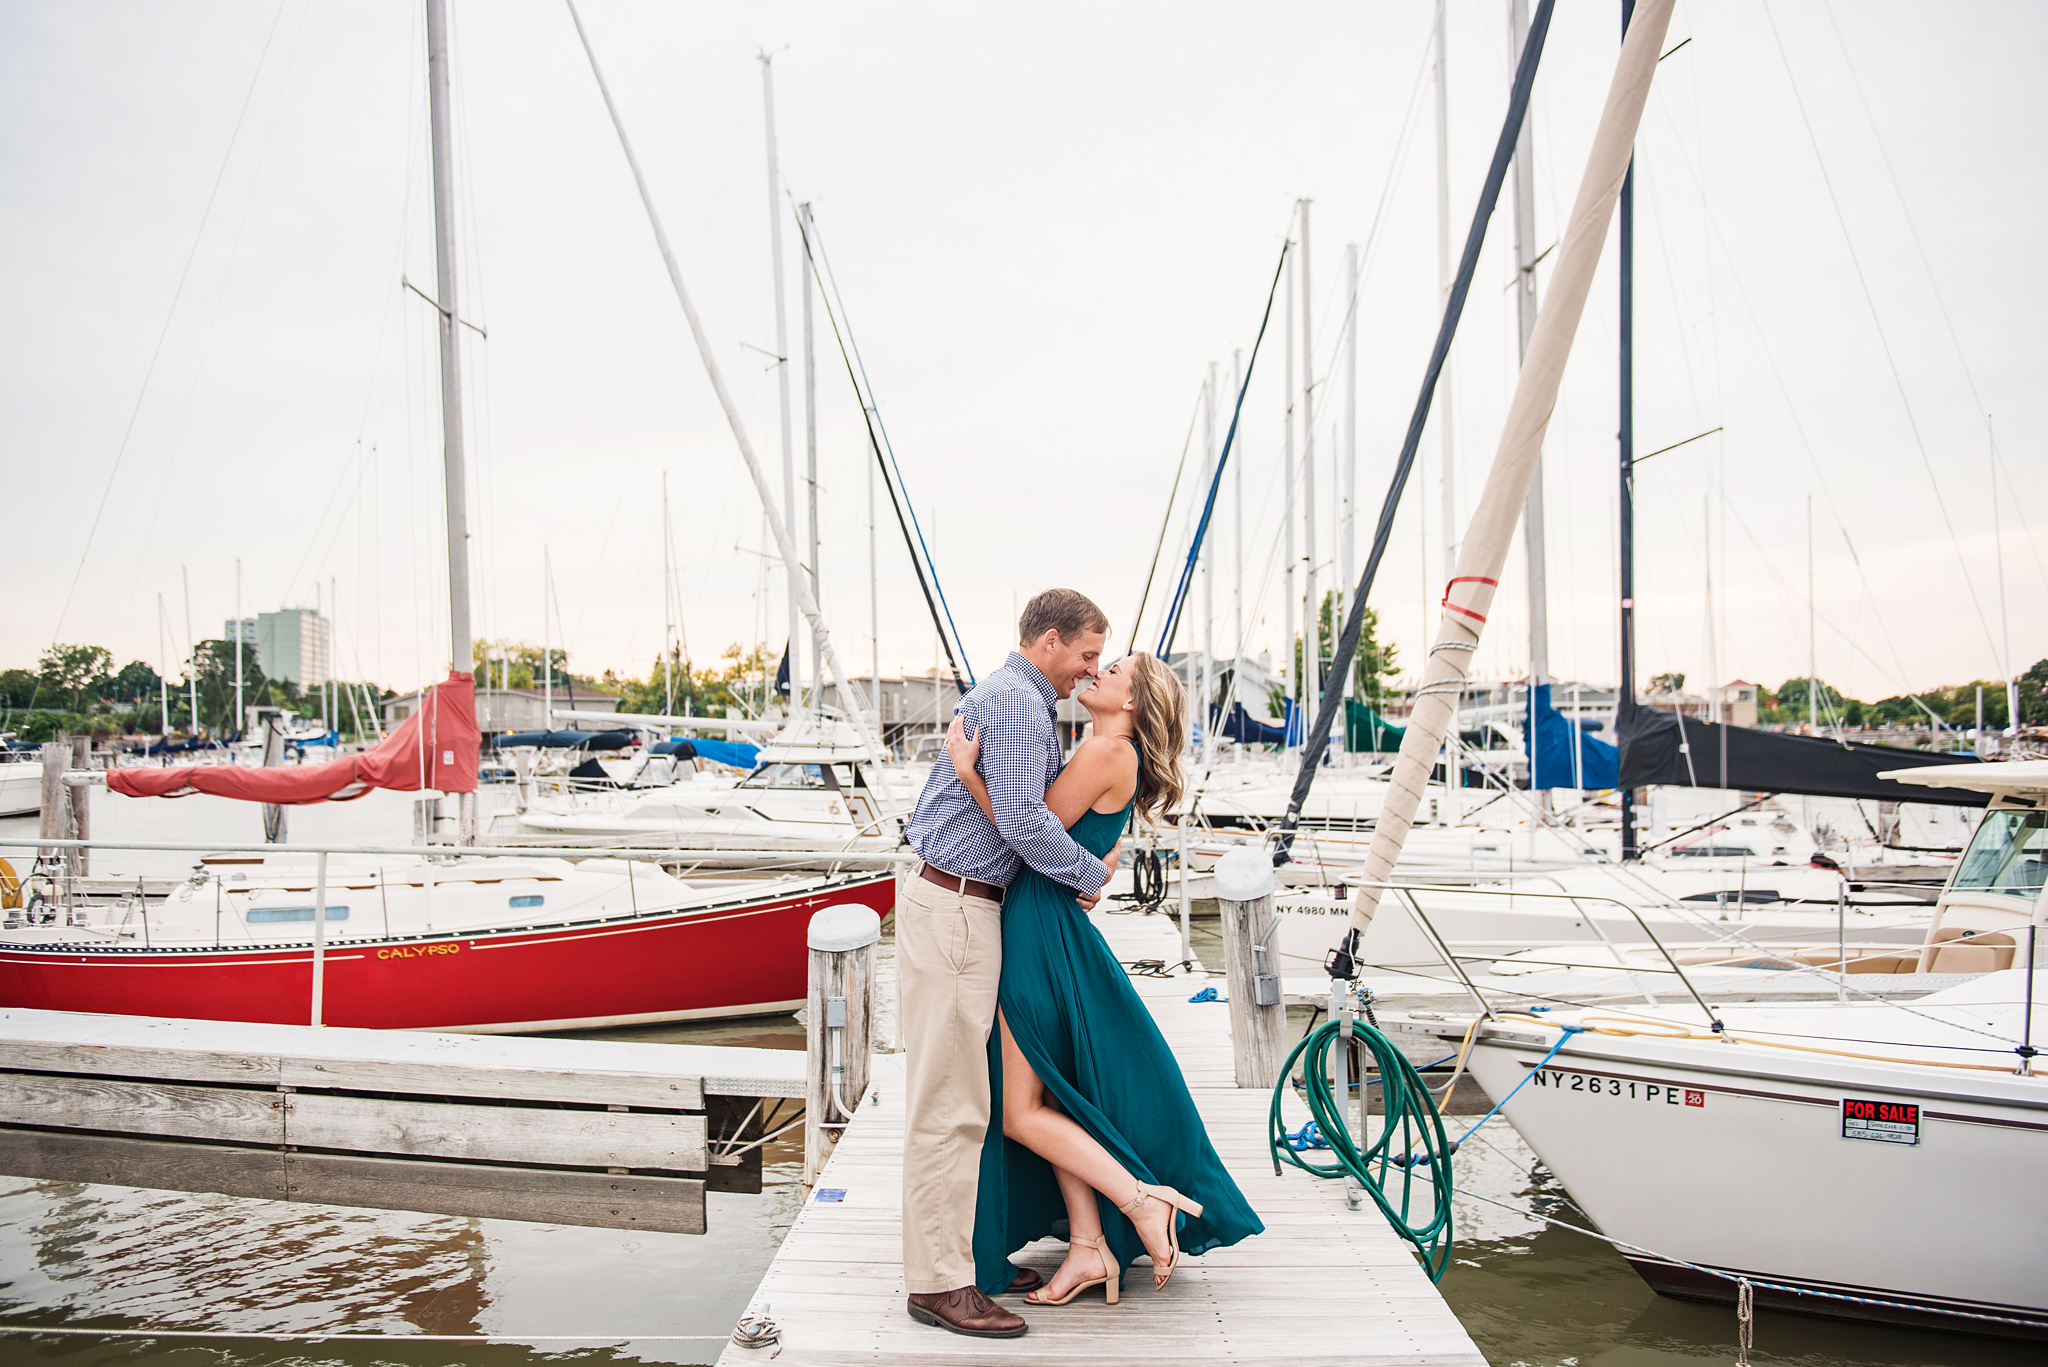 George_Eastman_House_Rochester_Yacht_Club_Rochester_Engagement_Session_JILL_STUDIO_Rochester_NY_Photographer_DSC_8174.jpg